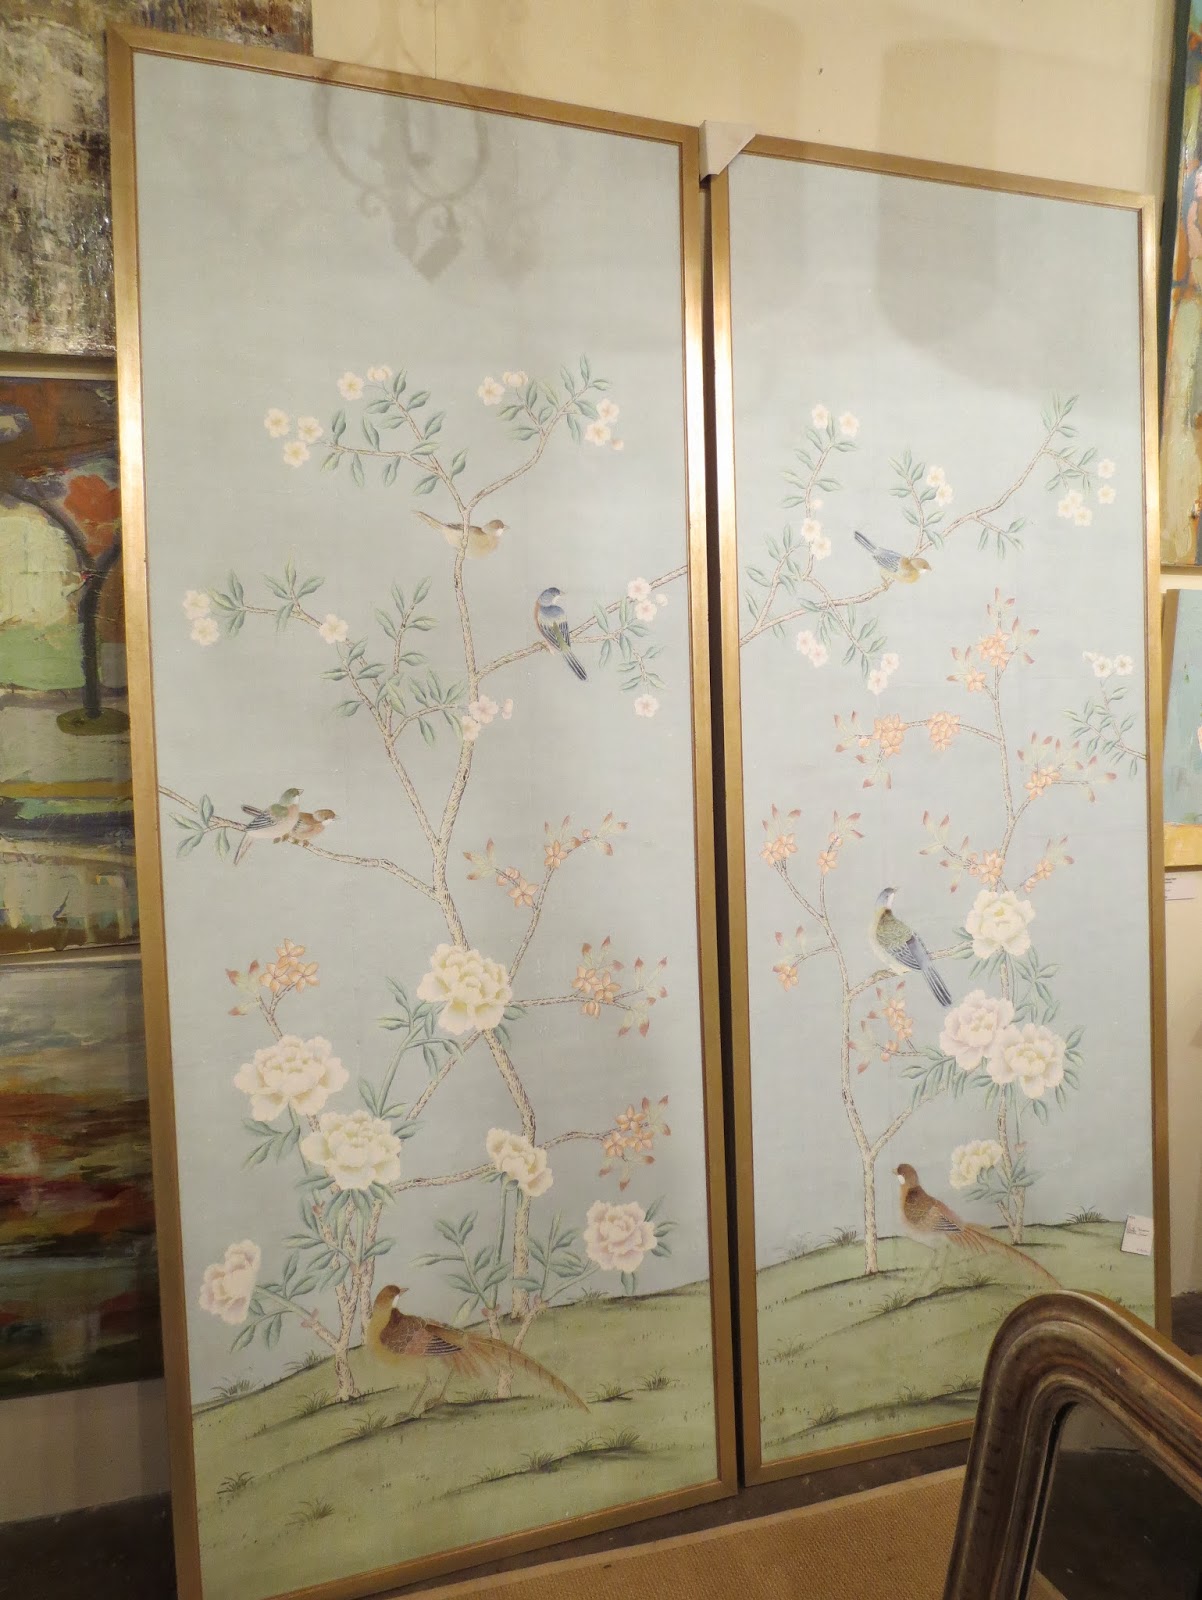 Free Download Polish Patina In Shop Chinoiserie Wallpaper Panels 1202x1600 For Your Desktop Mobile Tablet Explore 49 Chinoiserie Wallpaper Panels Chinoiserie Wallpaper Chinoiserie Wallpaper For Sale Blue Chinoiserie Wallpaper,Creamy Lemon Parmesan Chicken